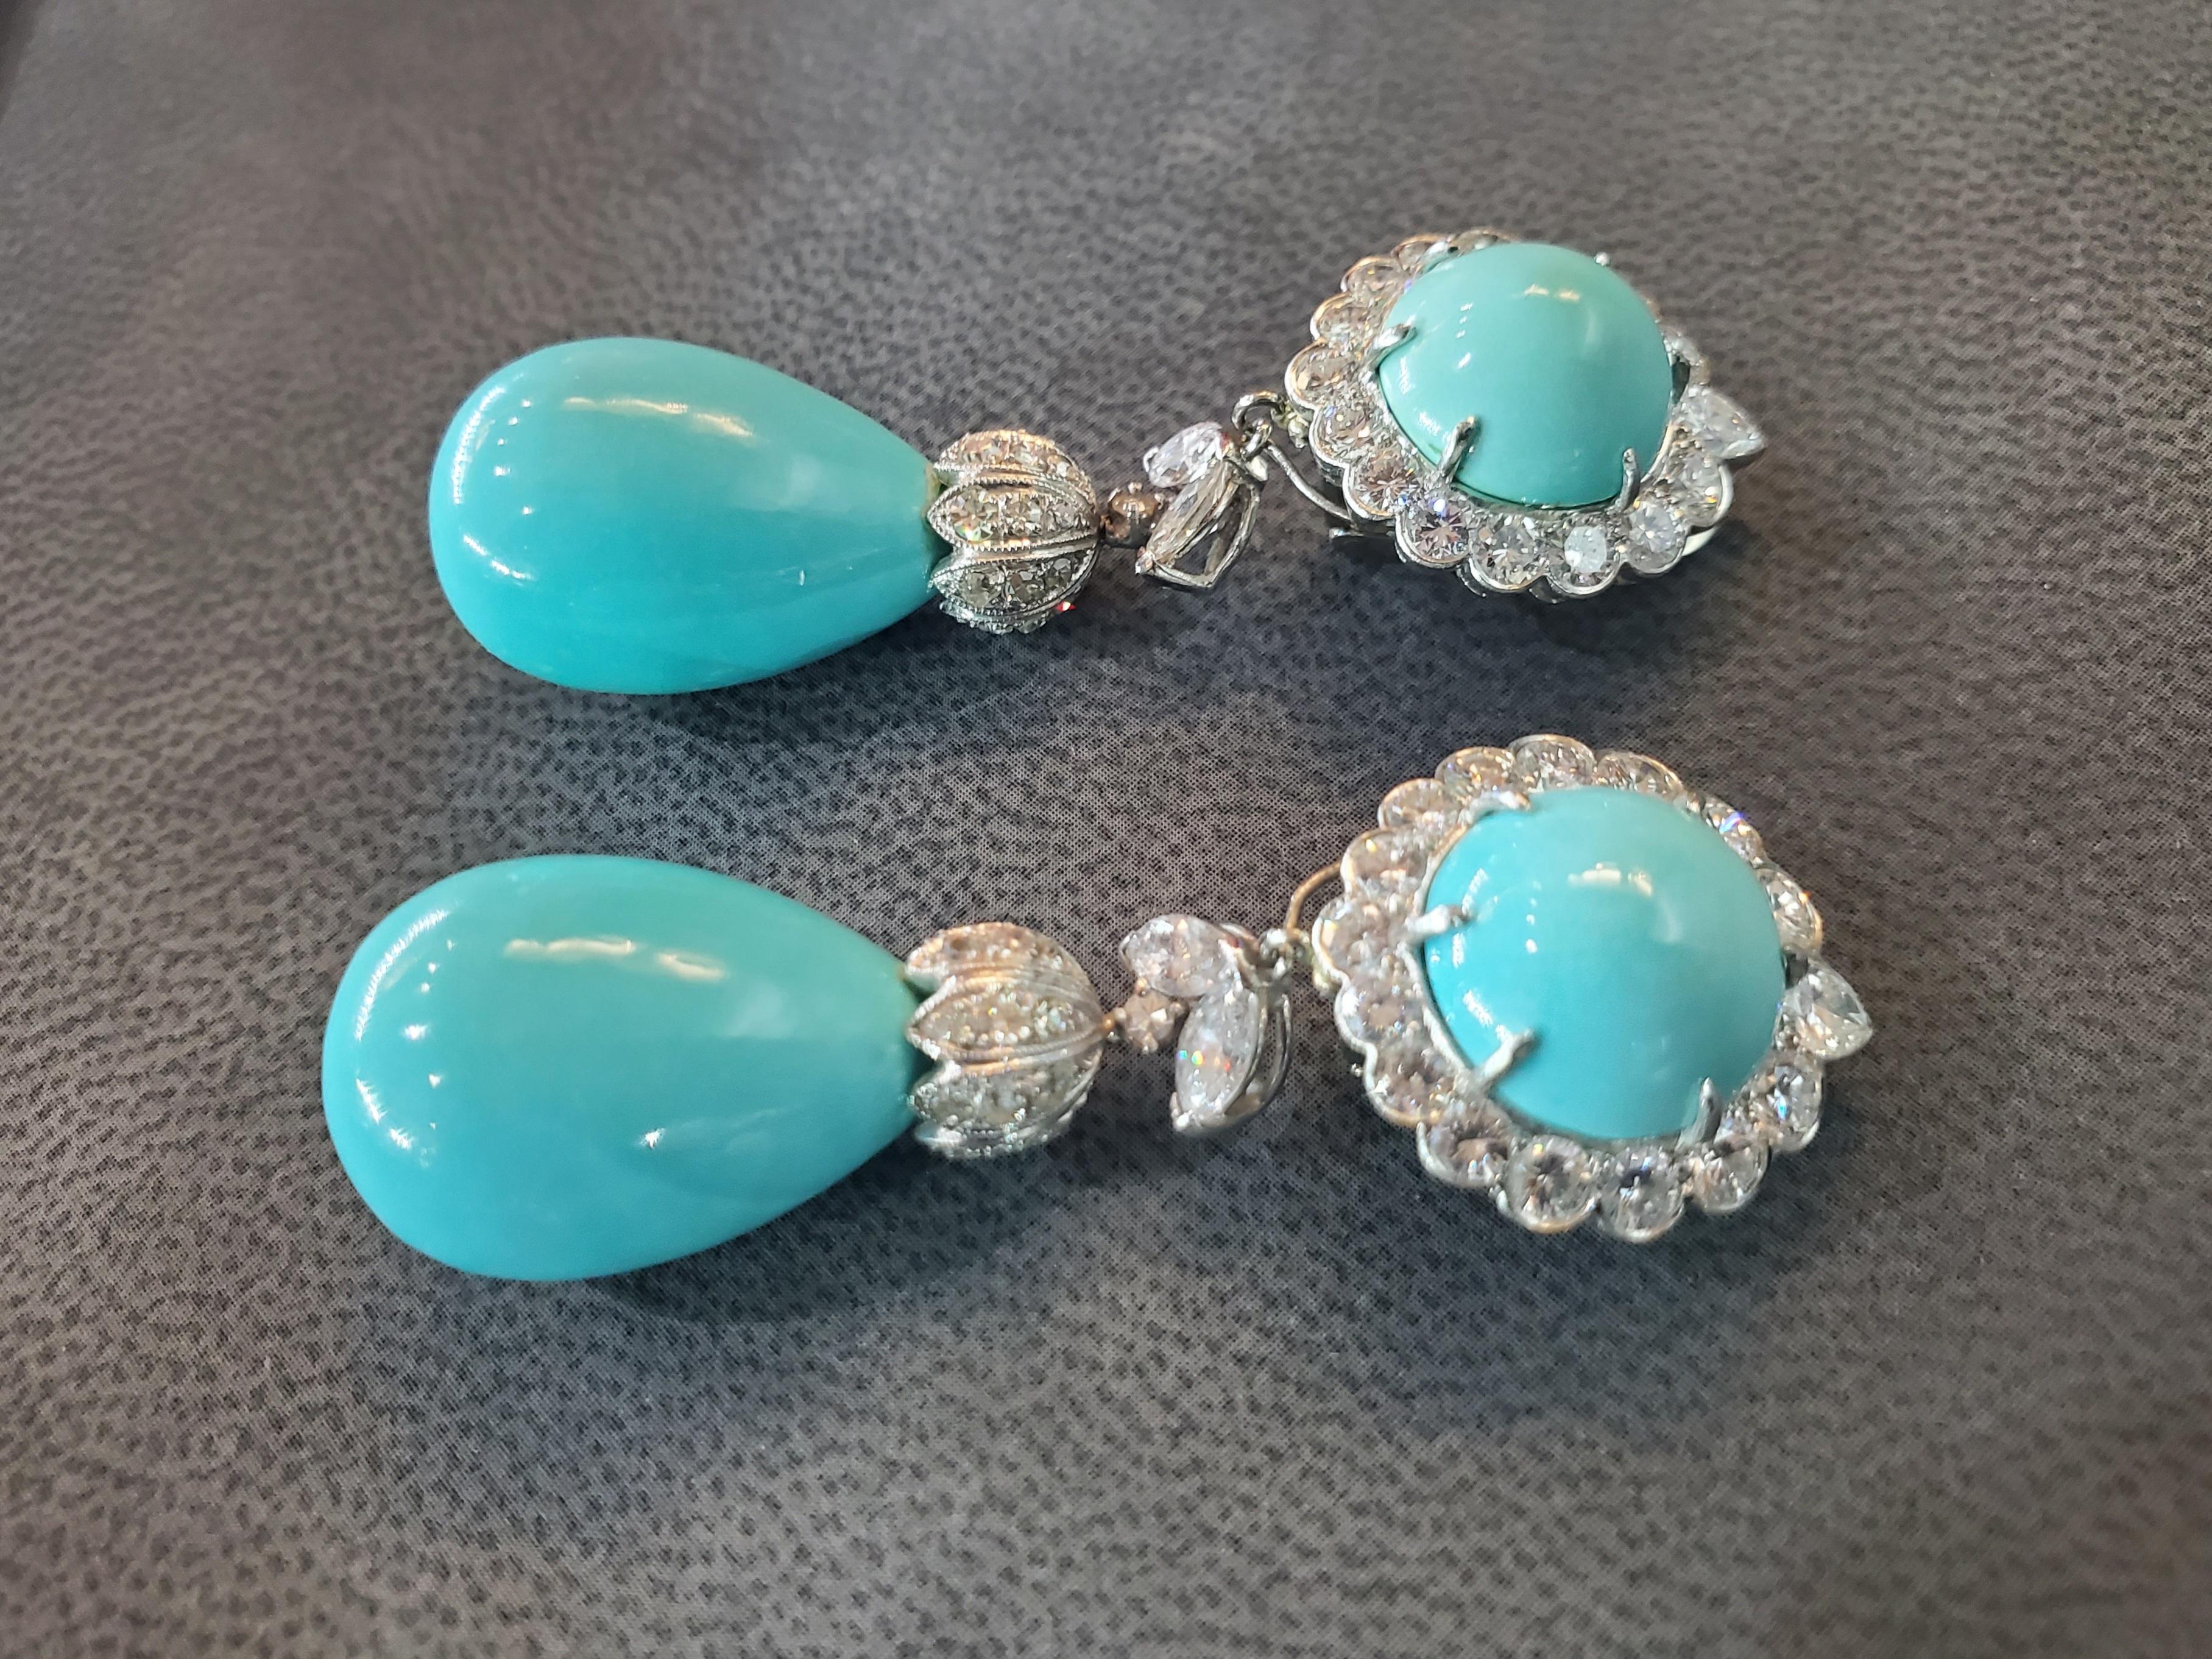 Iconic Van Cleef & Arpels Turquoise & Diamond 'Day and Night' Earrings 2